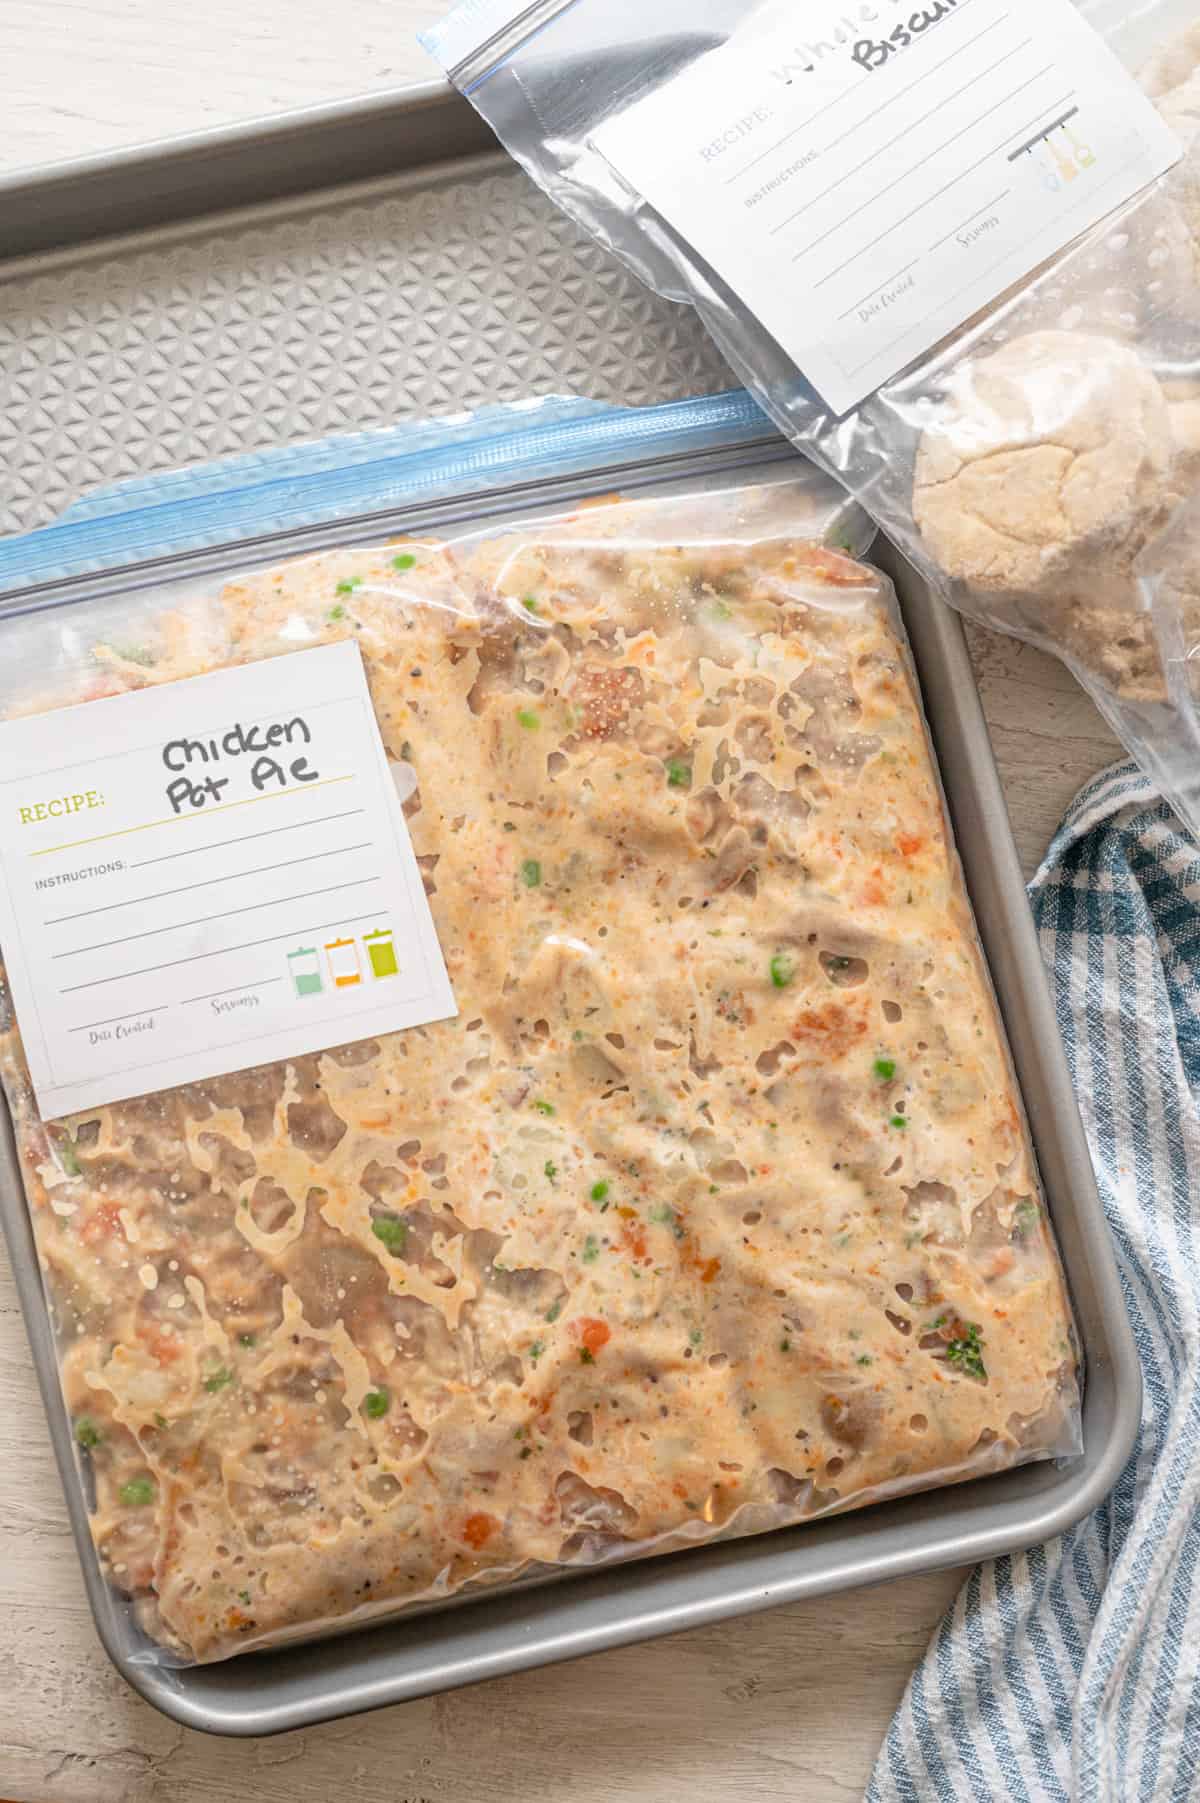 Crockpot chicken pot pie in a freezer meal bag with another bag of frozen biscuits.